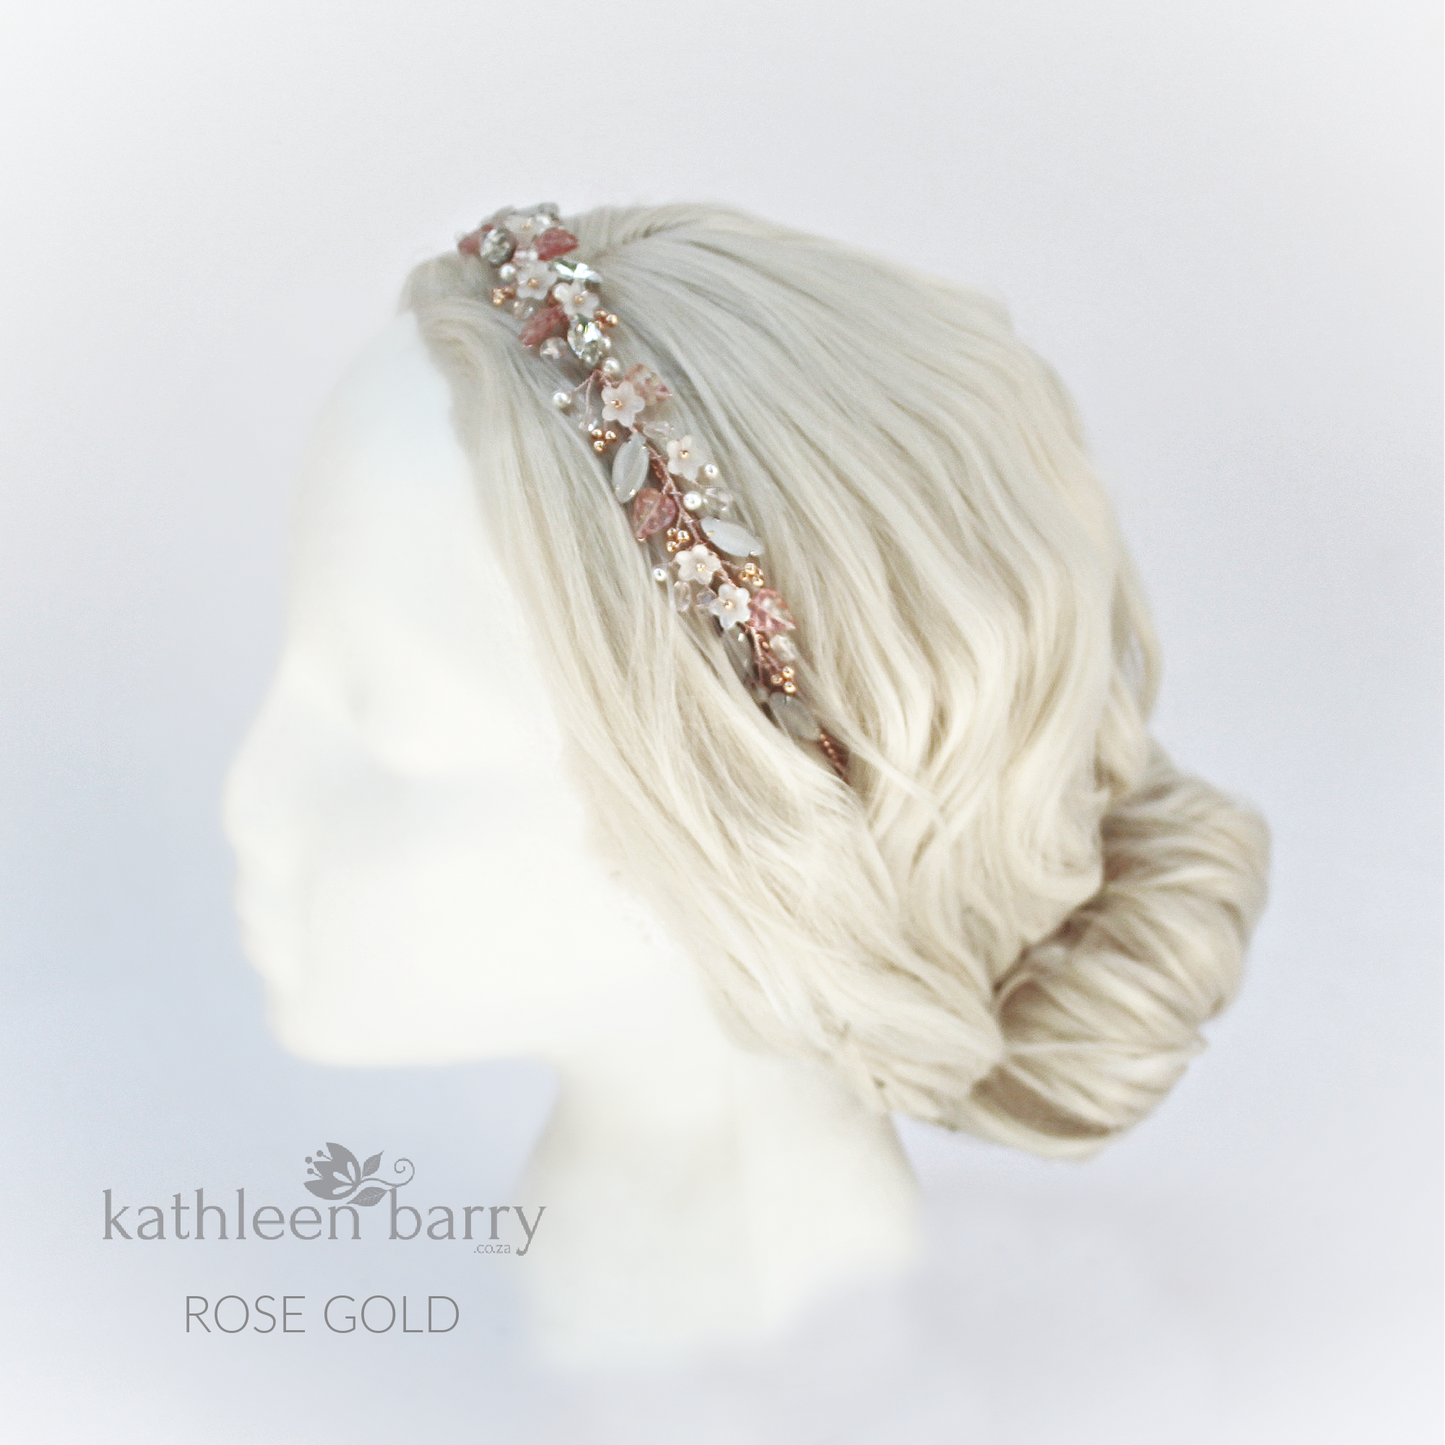 Freya floral jewelled headband - color variations on wirework, leaves & pearls available